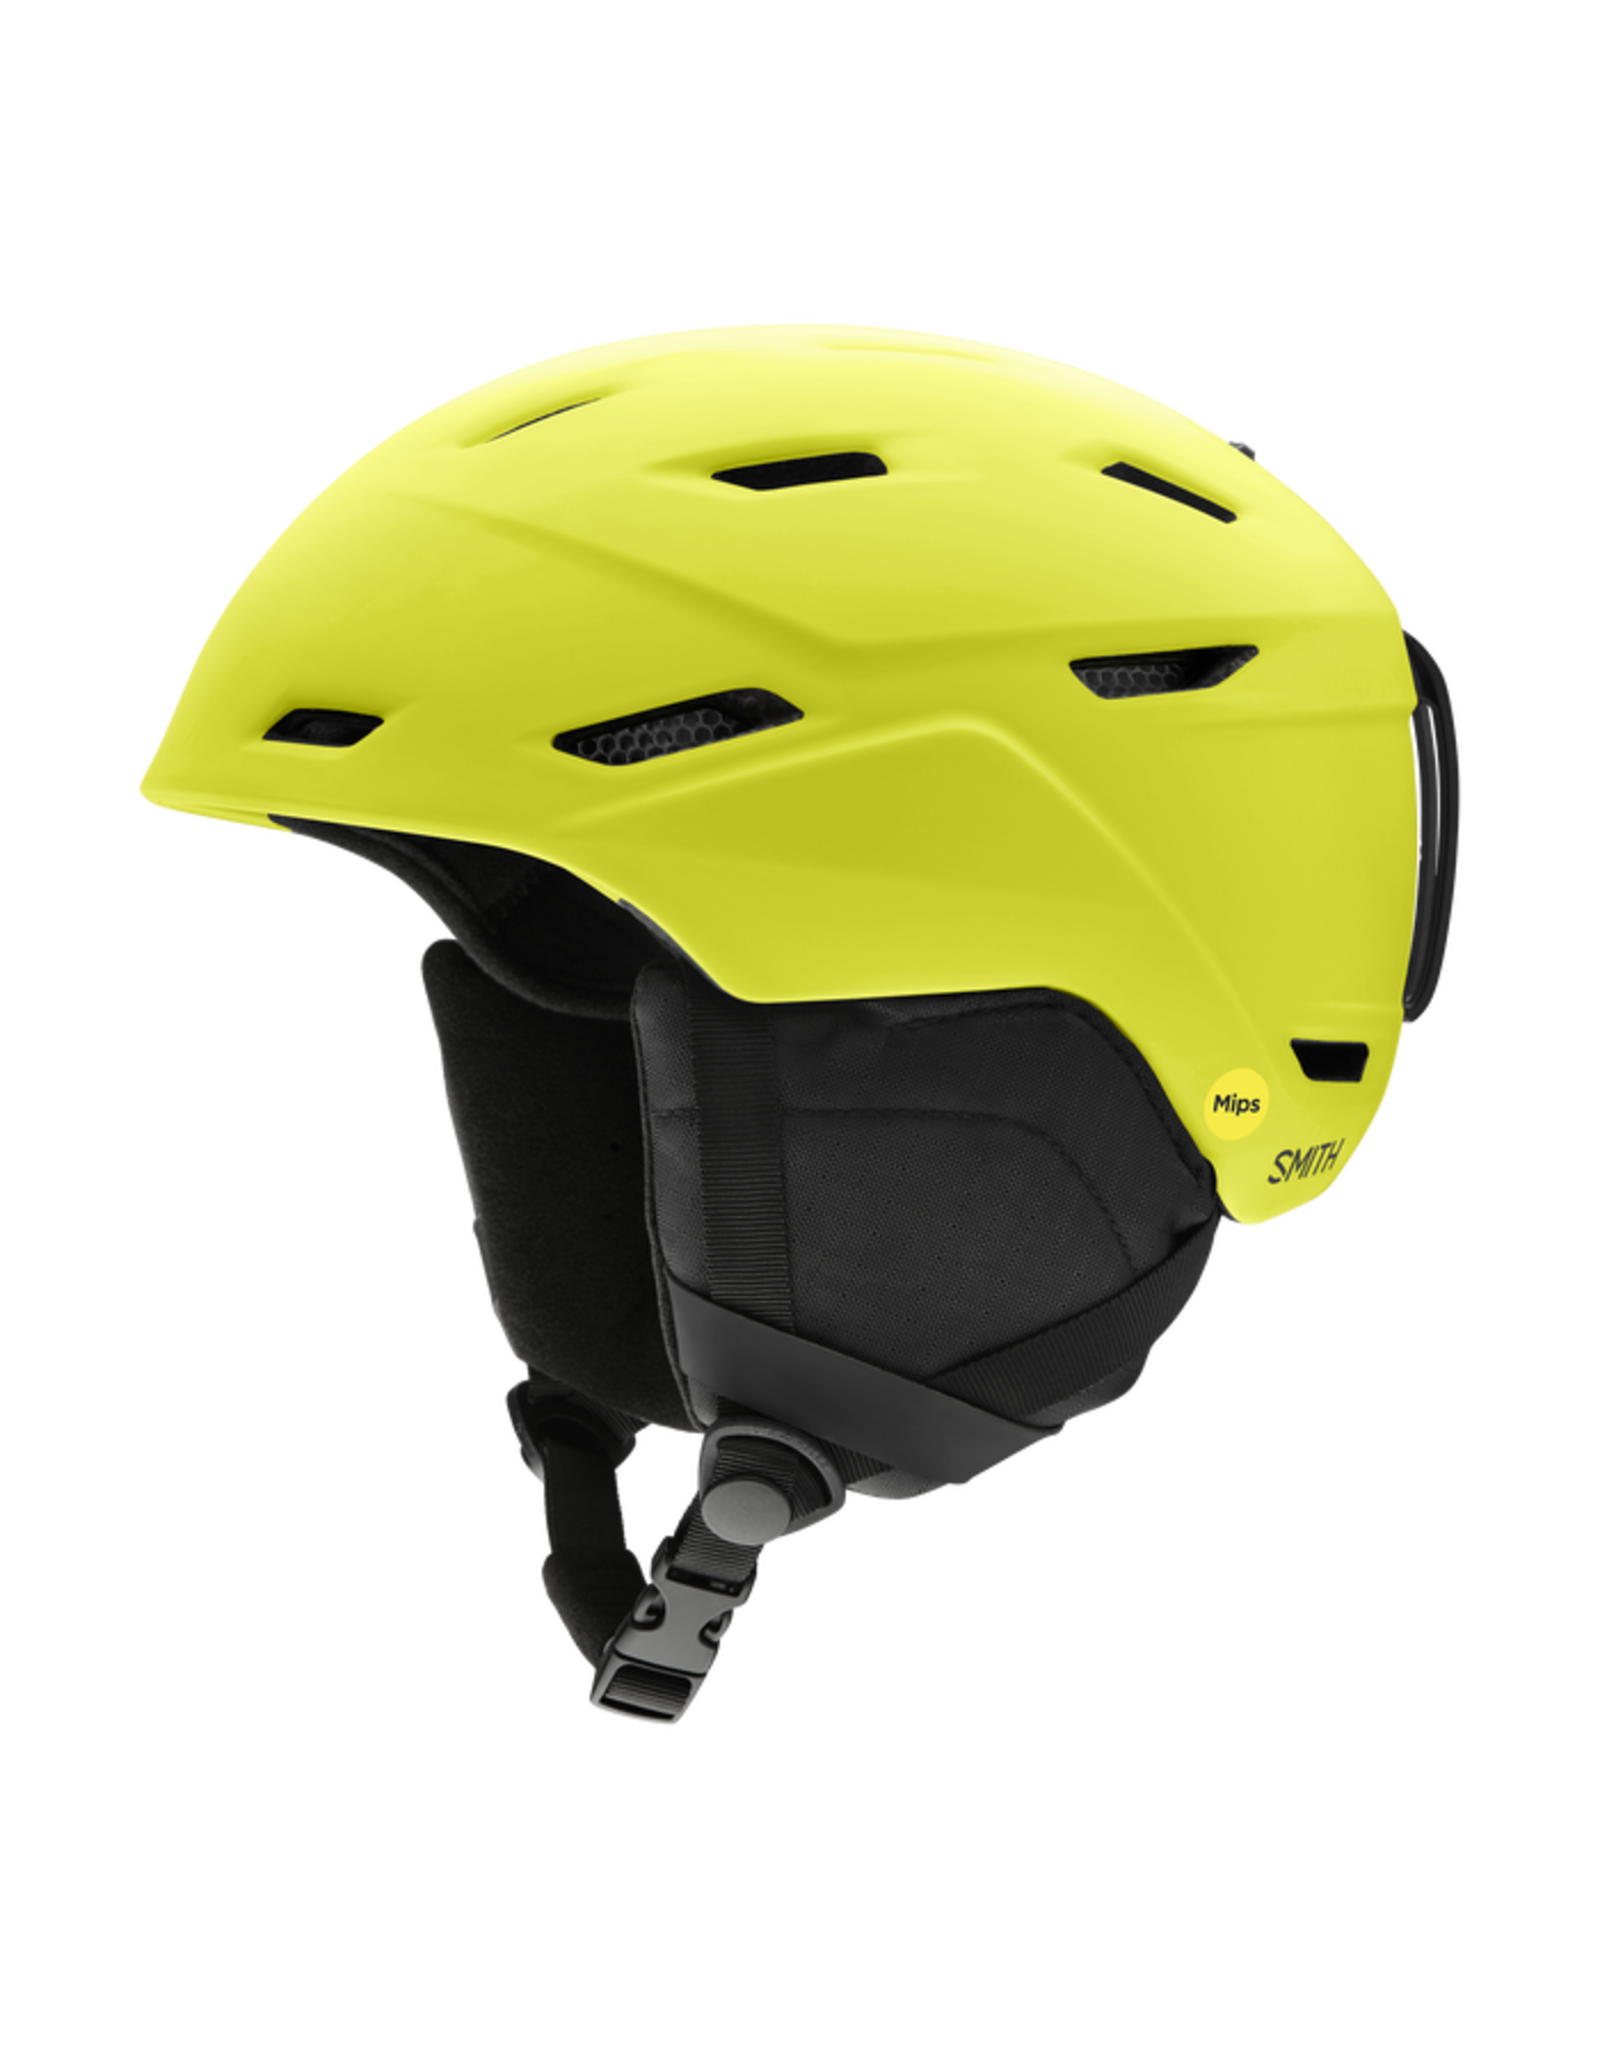 Smith Smith Mission mips helmet - Matte Neon Yellow - Small 51-55 cm